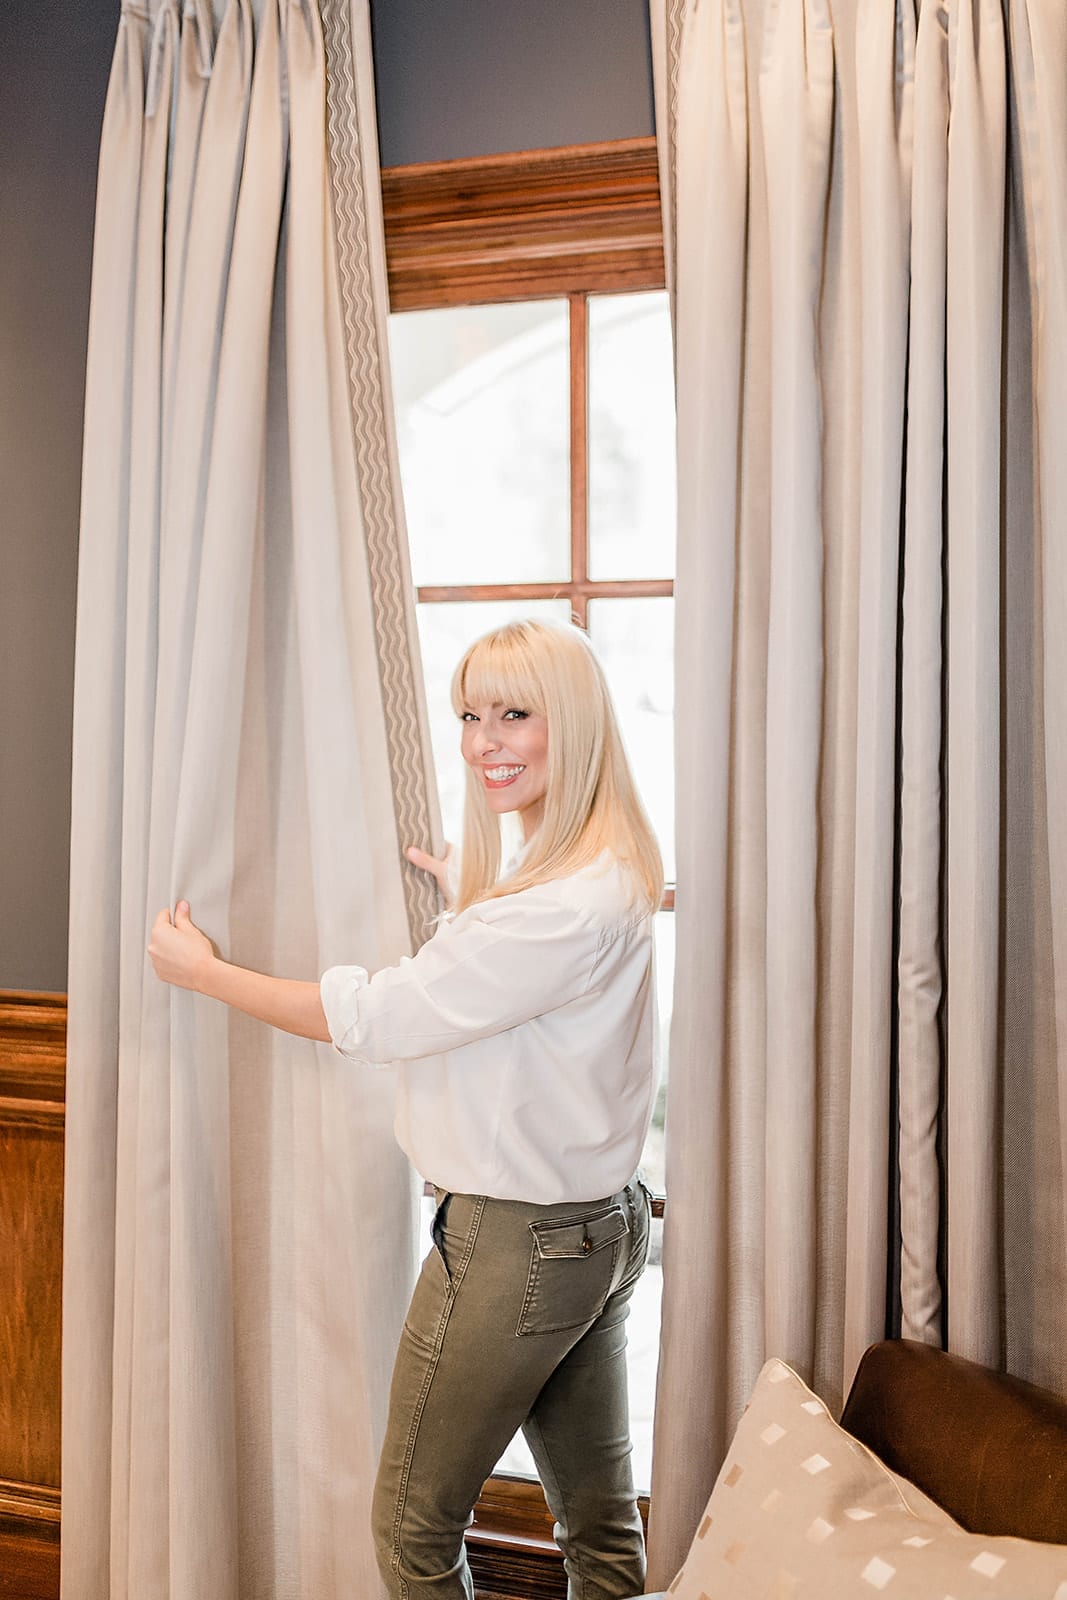 Lifestyle blogger Kelly Page, of bluegraygal, shows off her custom draperies made by Calico.